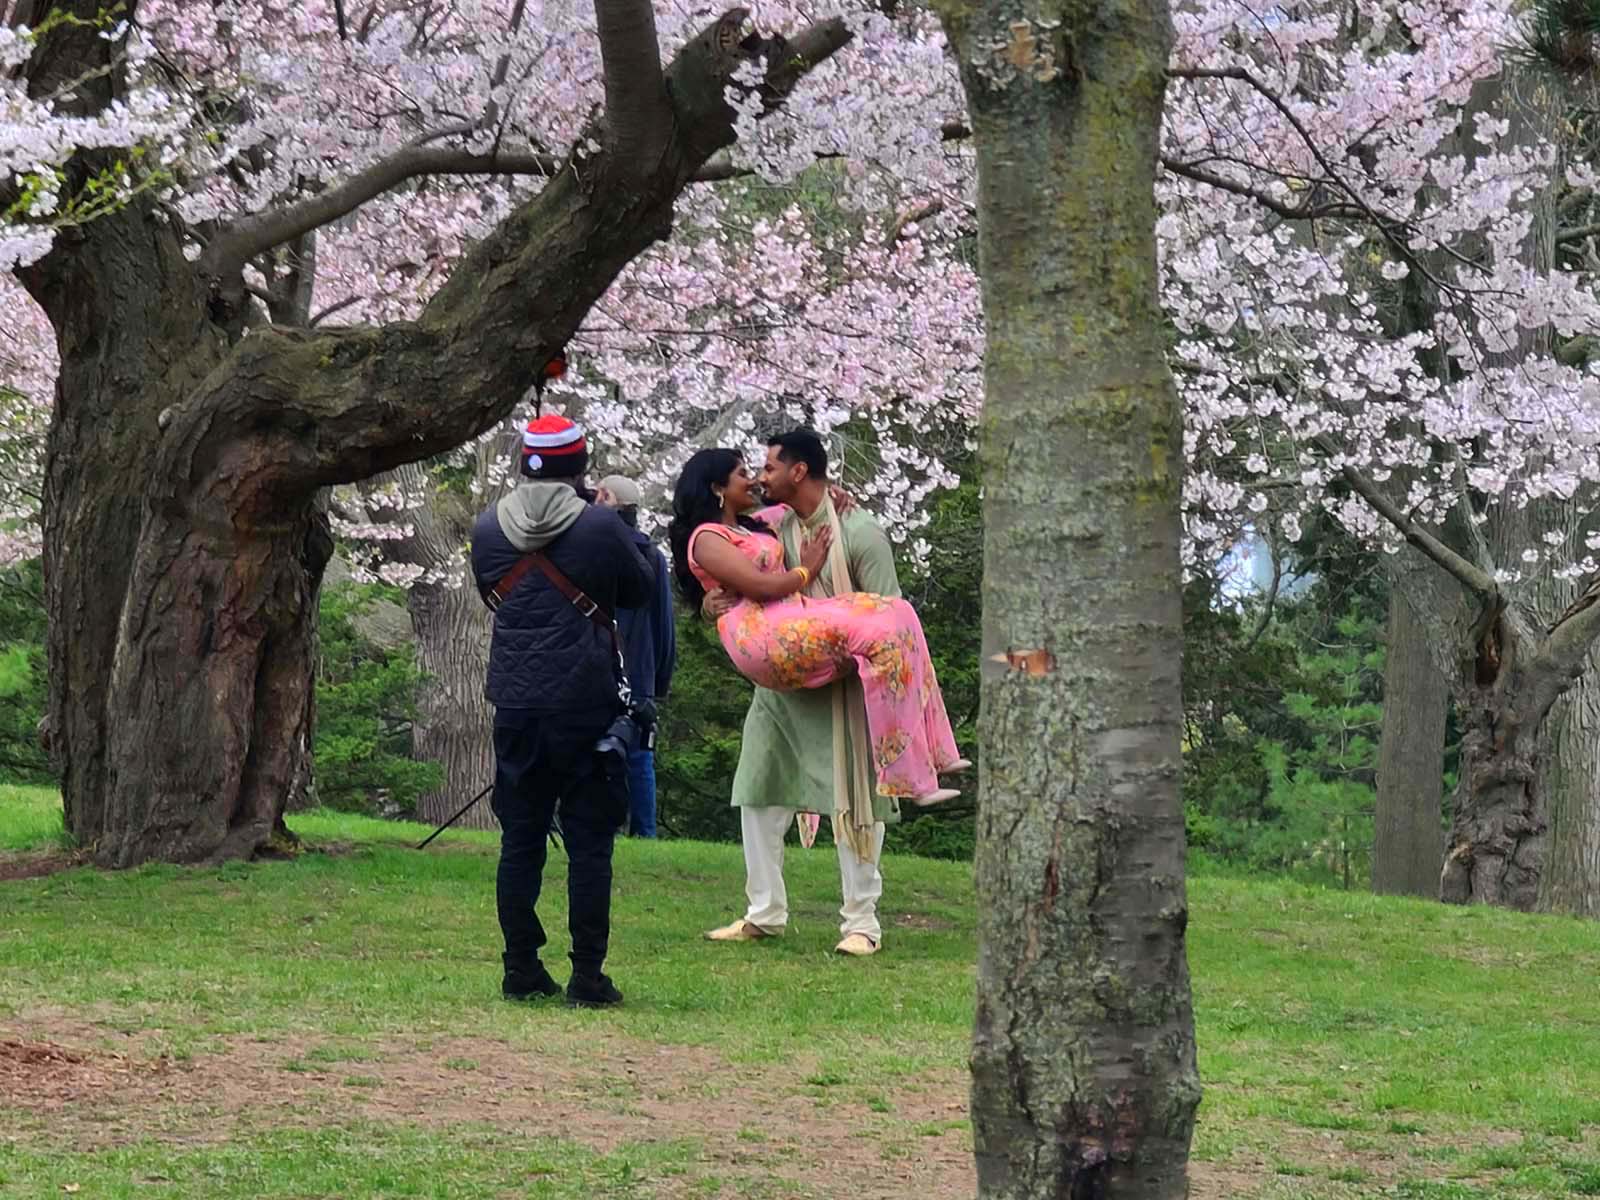 A photographer taking a portrait of an Indian couple under the cherry blossoms.